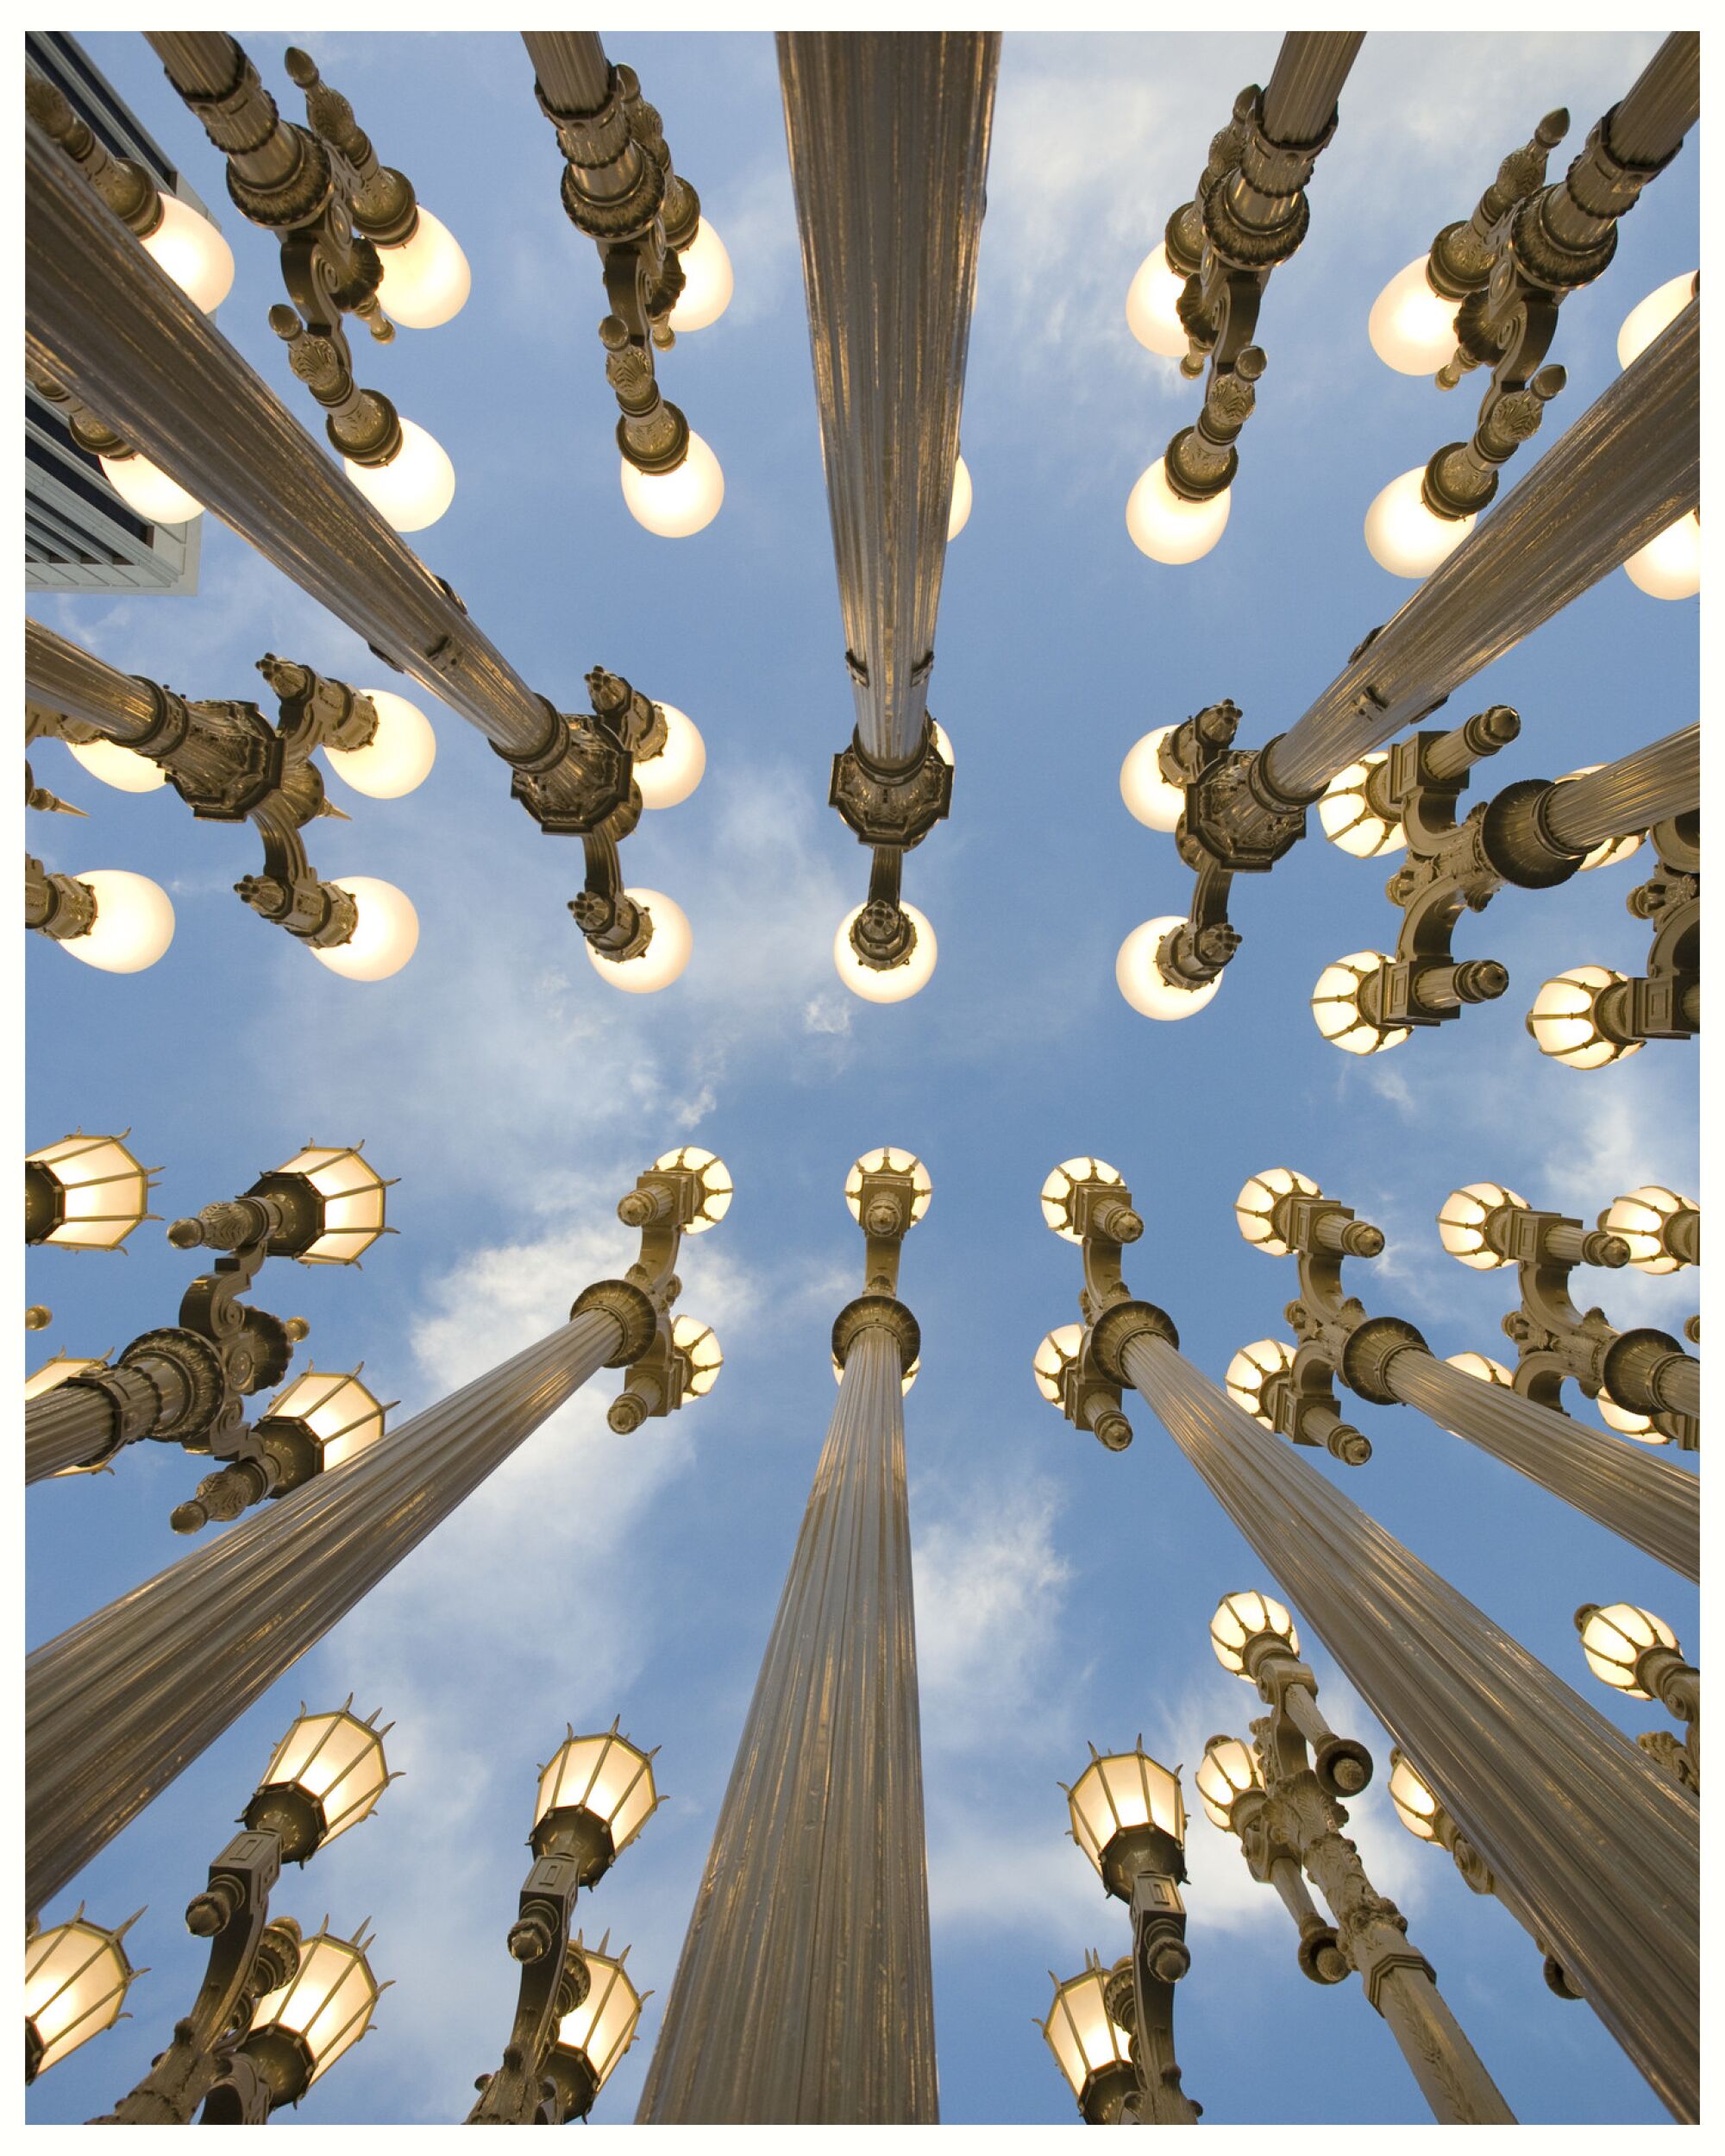 An Urban Light poster from LACMA